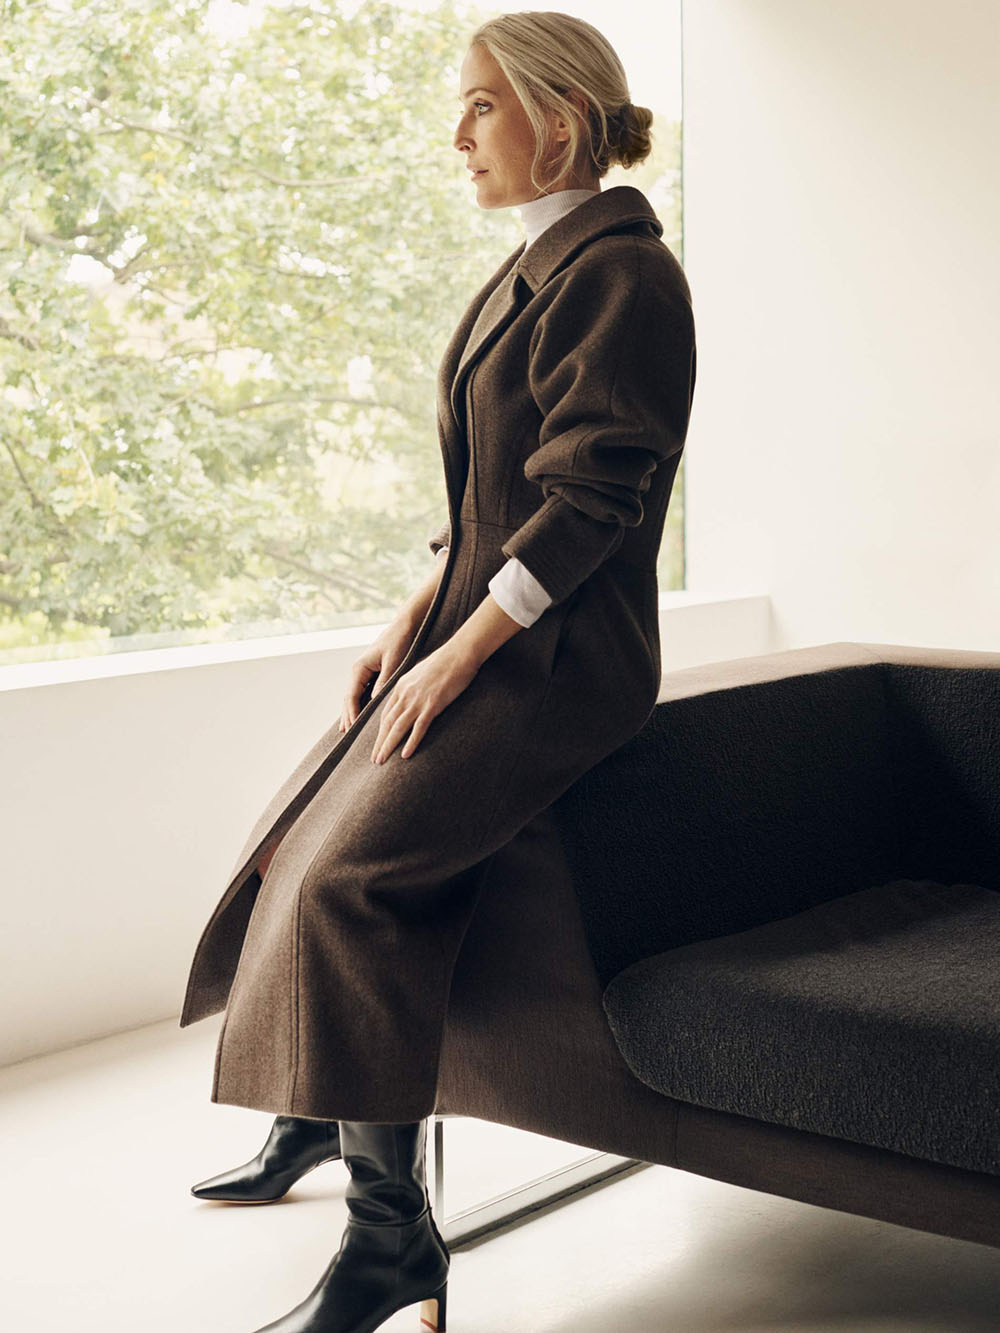 Gillian Anderson covers Porter Magazine November 30th, 2020 by Liz Collins